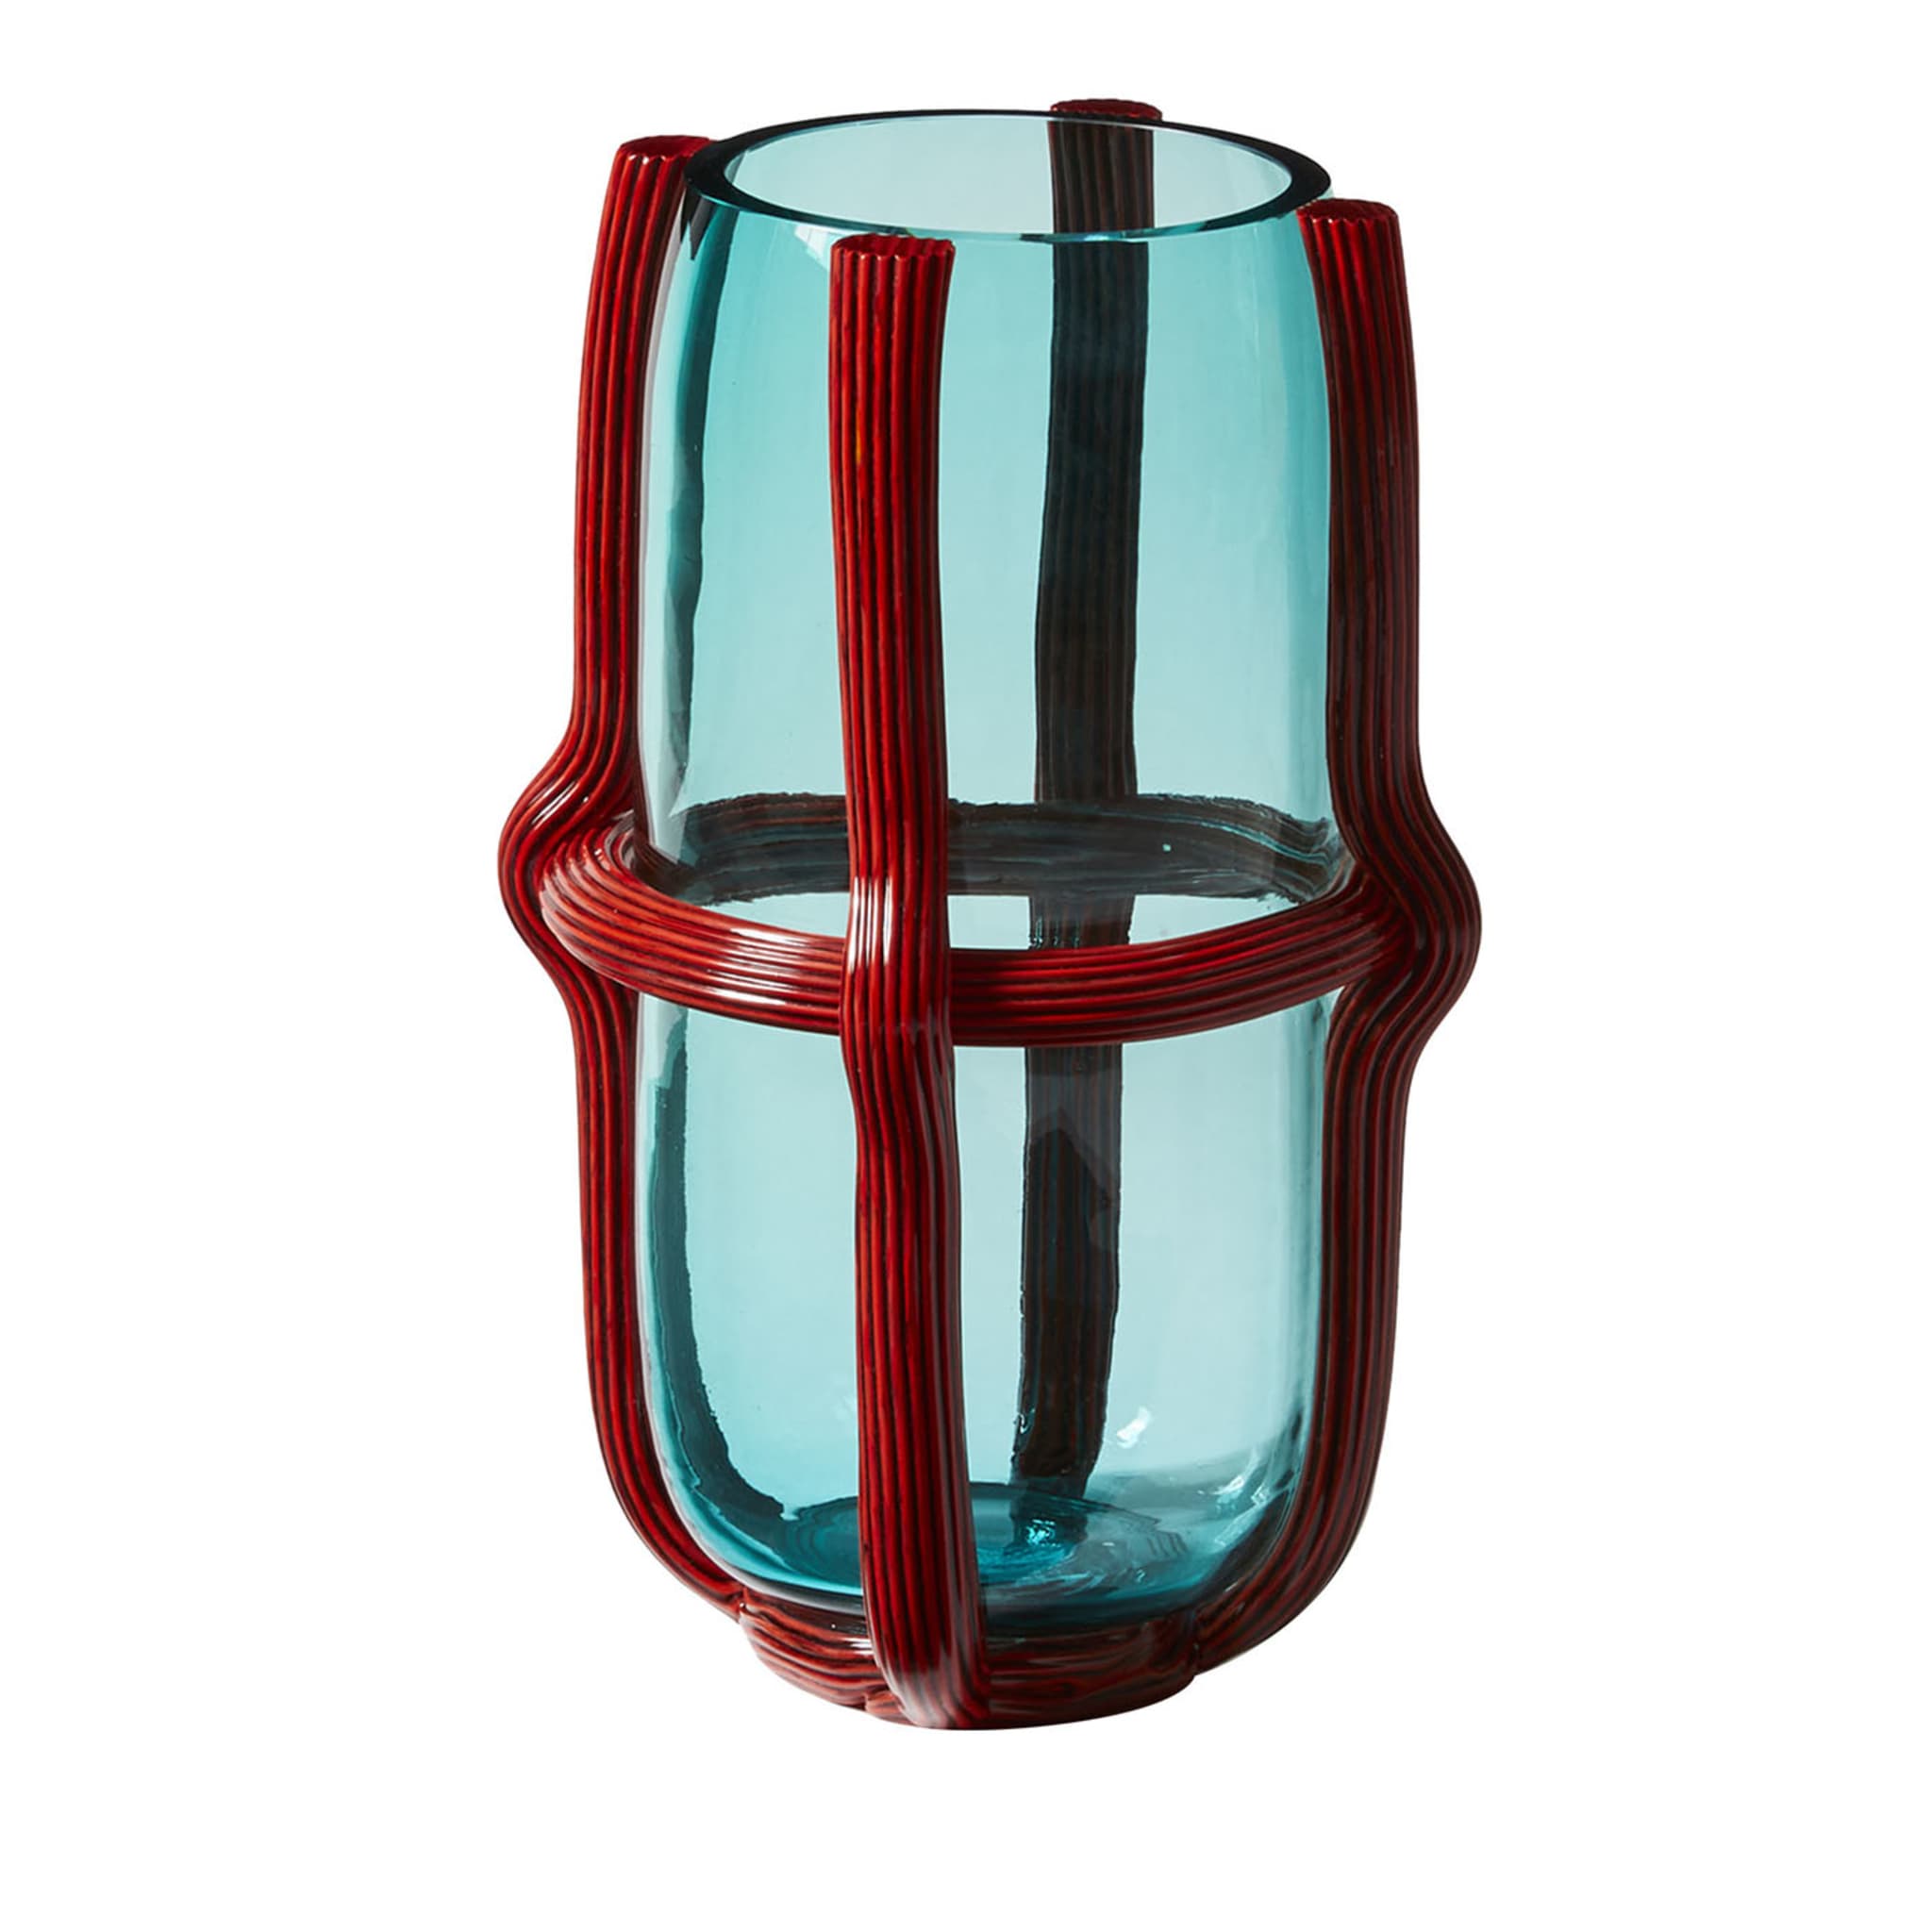 Sestiere Tall Red & Turquoise Vase by Patricia Urquiola - Main view